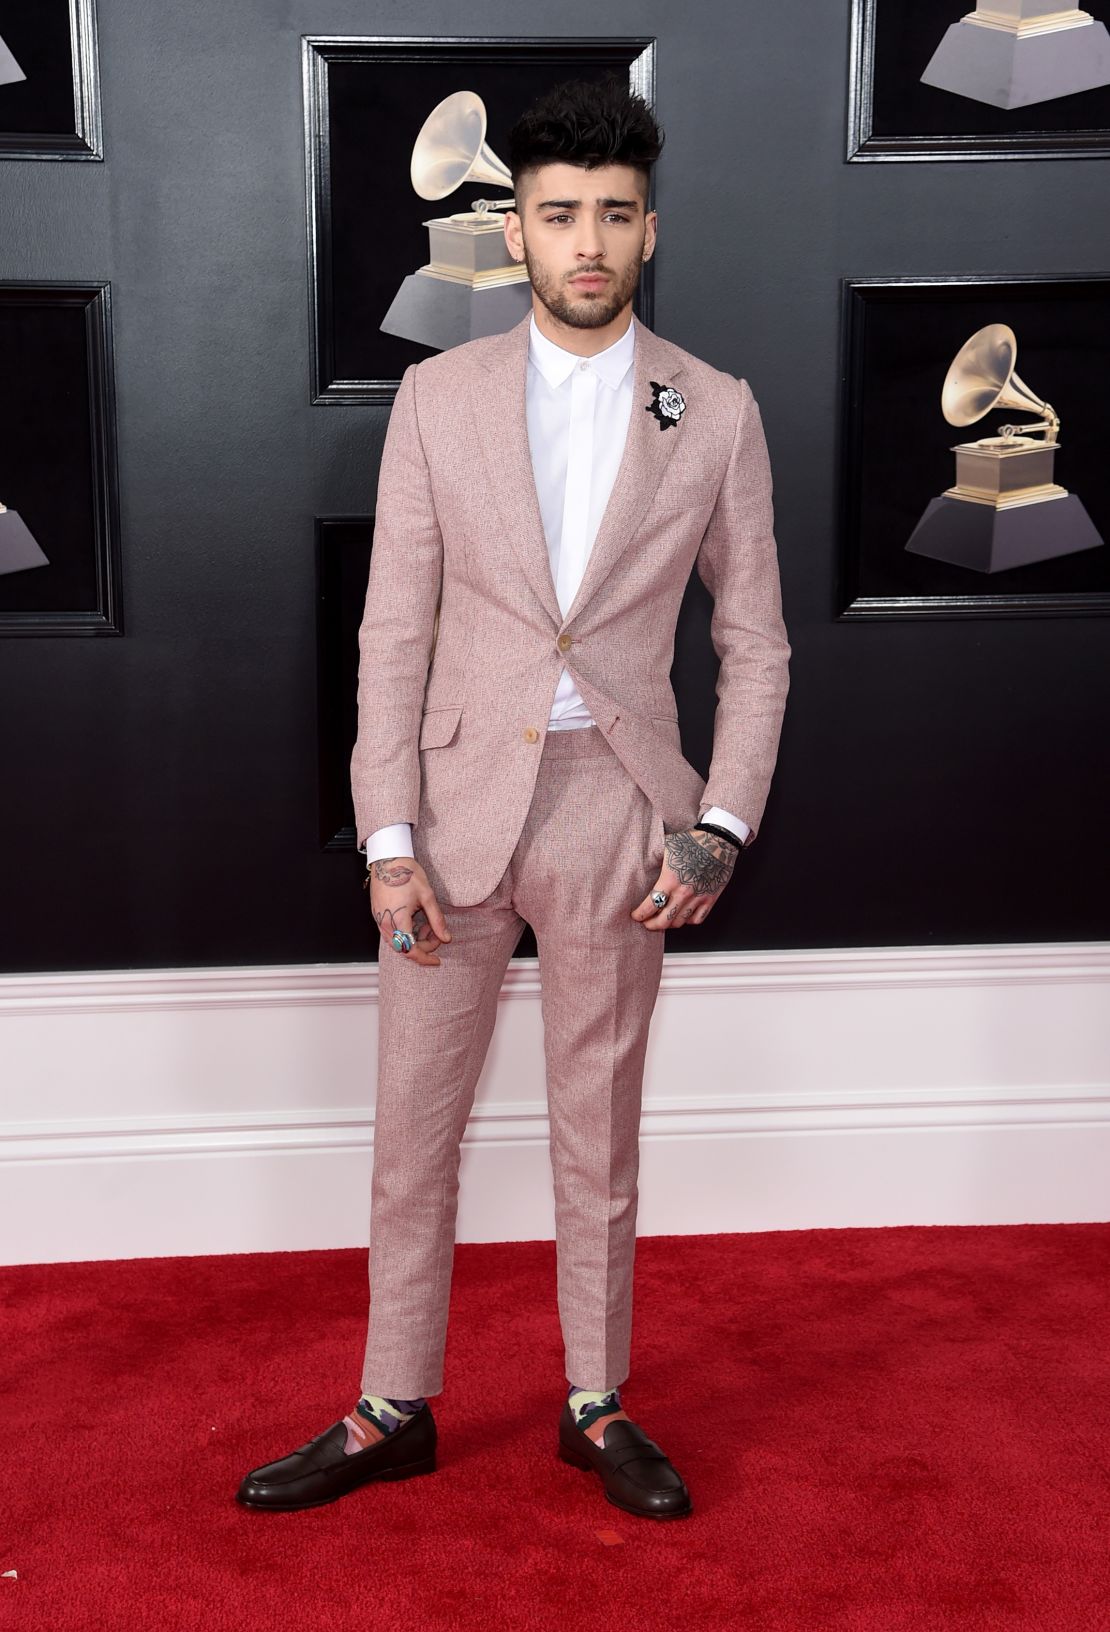 Zayn Malik attends the 60th Annual Grammy Awards at Madison Square Garden on January 28, 2018, in New York City.  